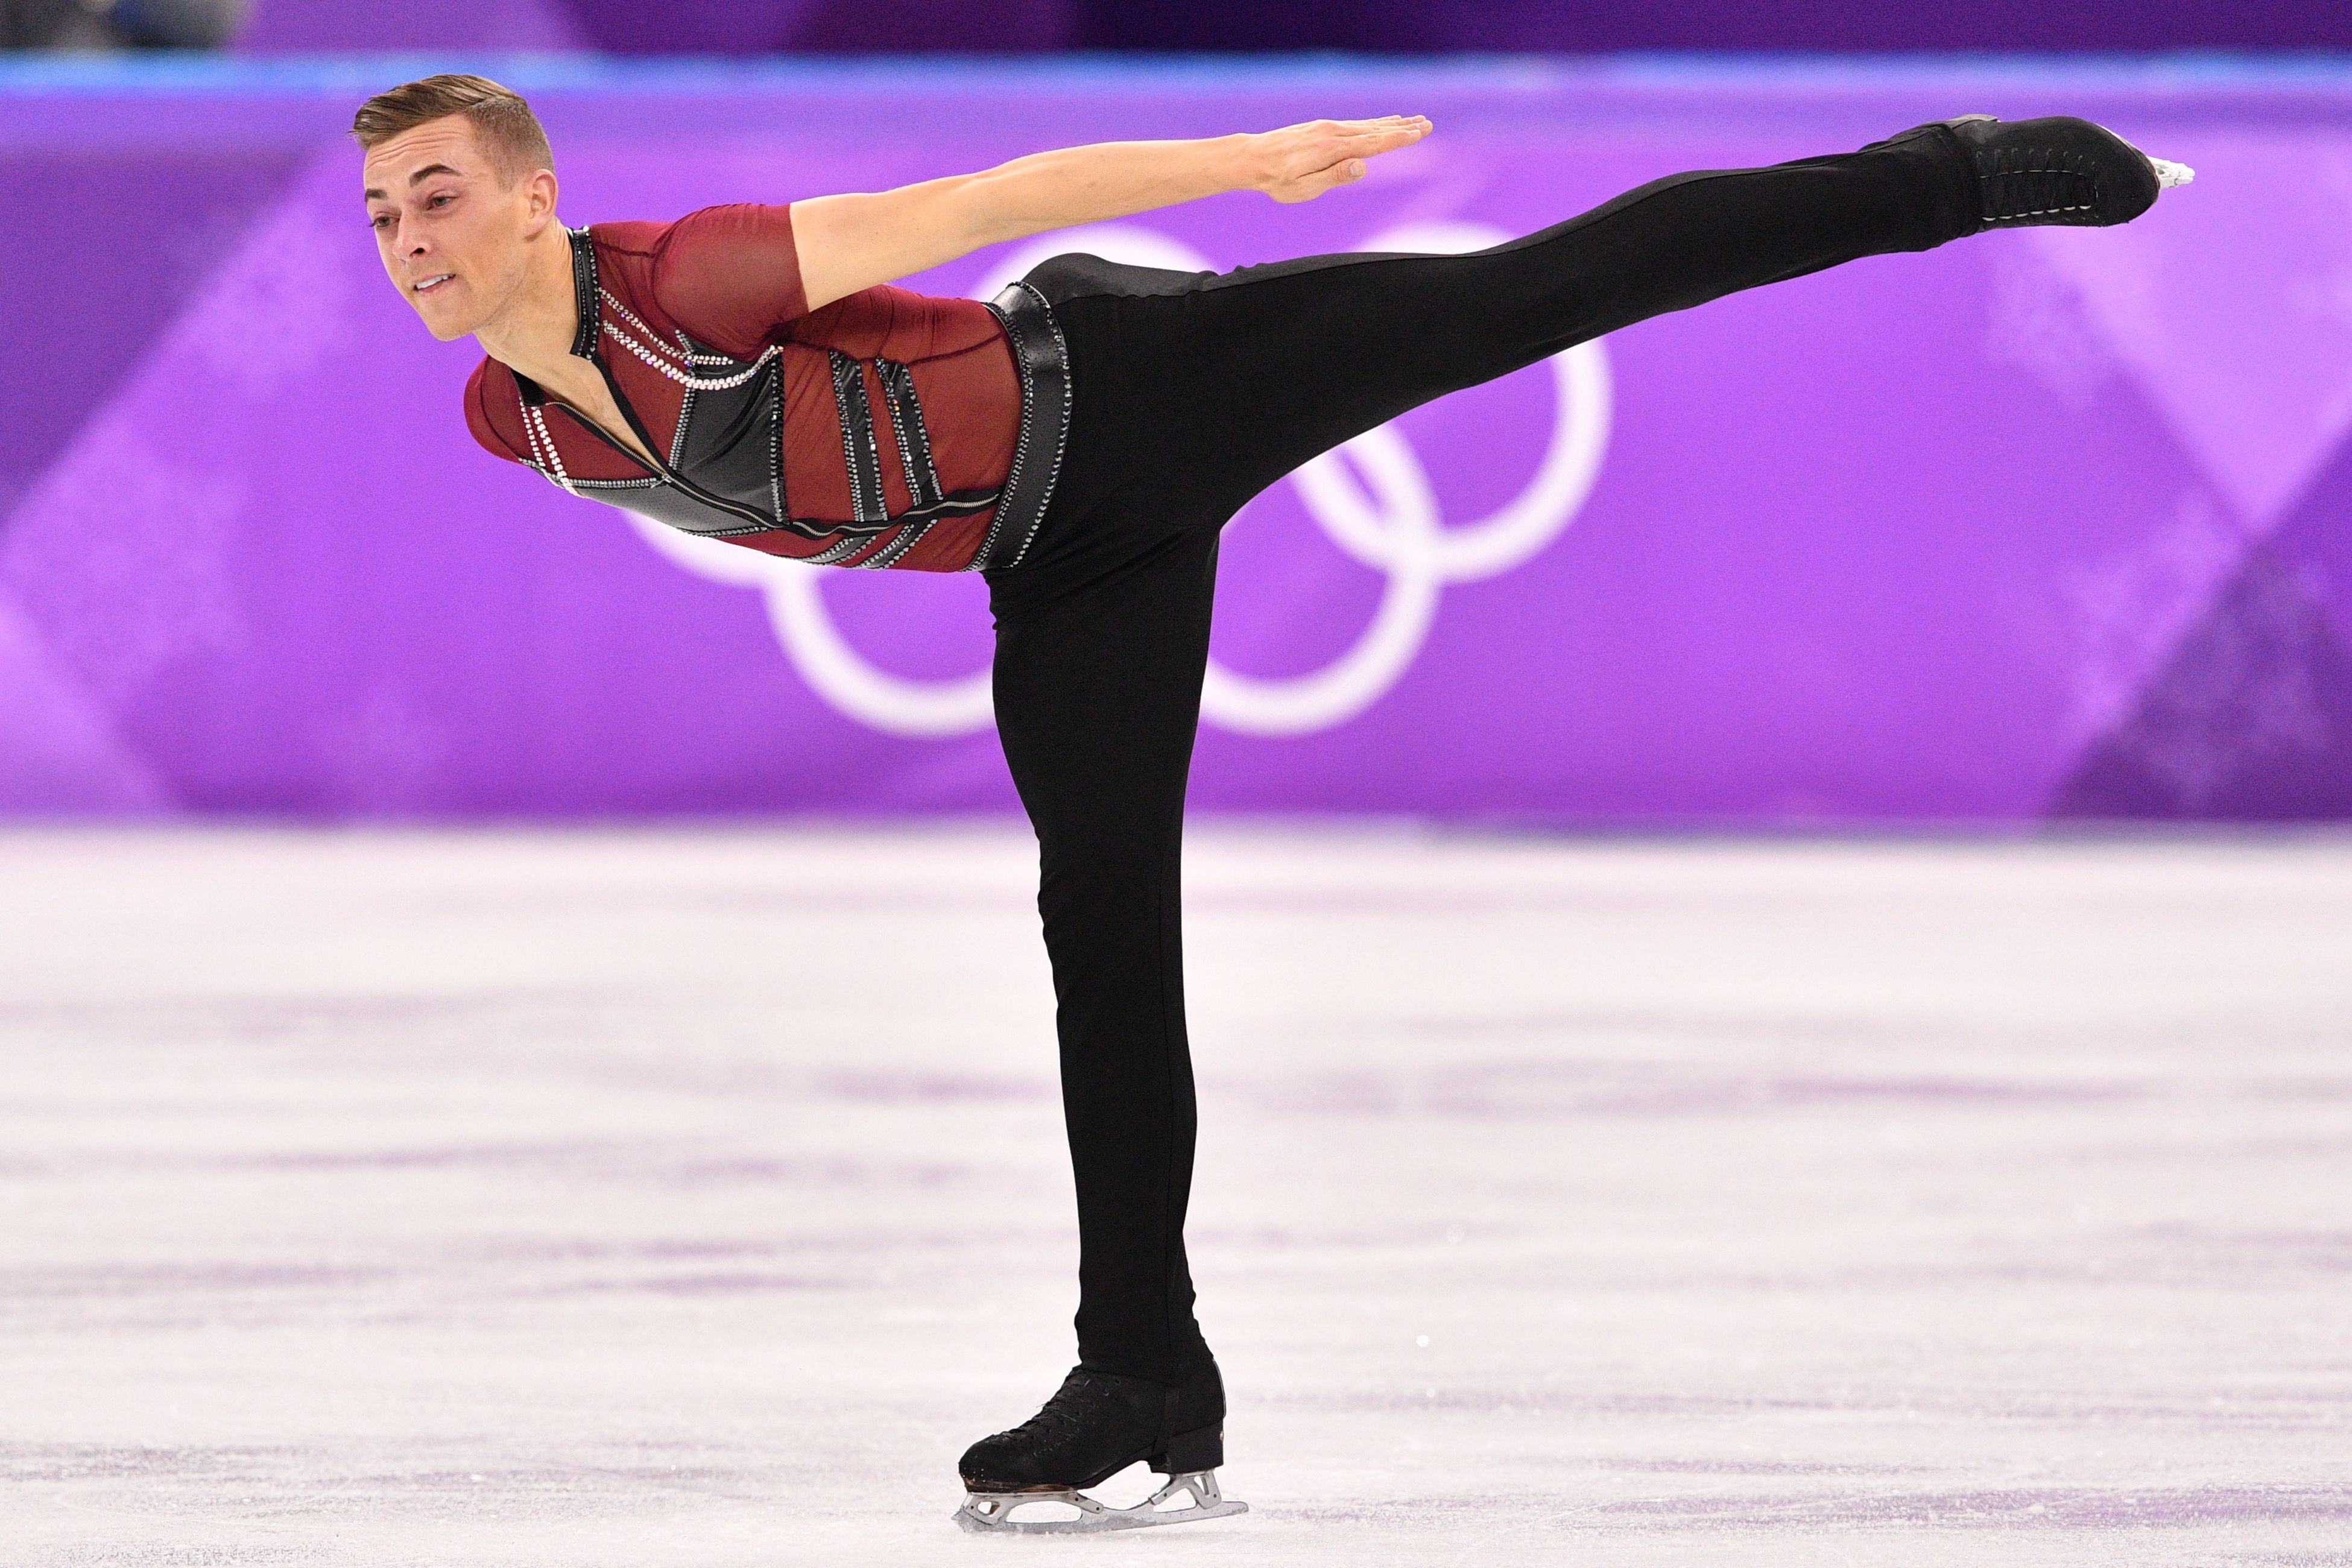 USA's Adam Rippon competes in the men's single skating short program of the figure skating event during the Pyeongchang 2018 Winter Olympic Games at the Gangneung Ice Arena in Gangneung on Feb. 16, 2018. (Mladen Antonov—AFP/Getty Images)